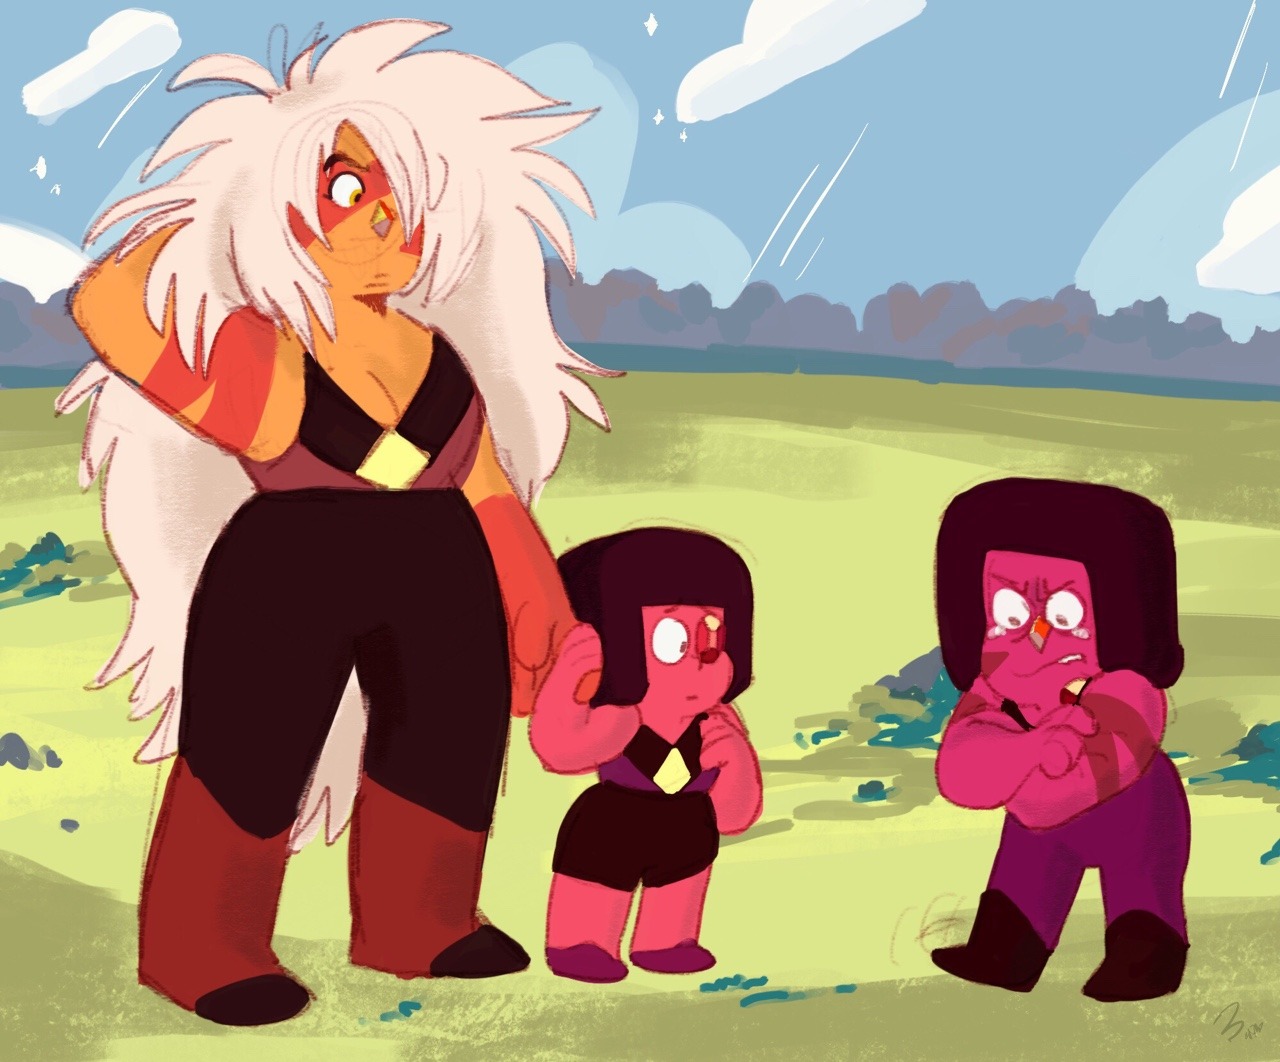 Quick drawing b4 bed hehh-The gem on the right corner is NOT a fusion. She’s Jasper’s and Eyeball’s angry baby lol. Fry(that is her name) is a Jasper and Ruby hybrid, she is based from an AU of mine...